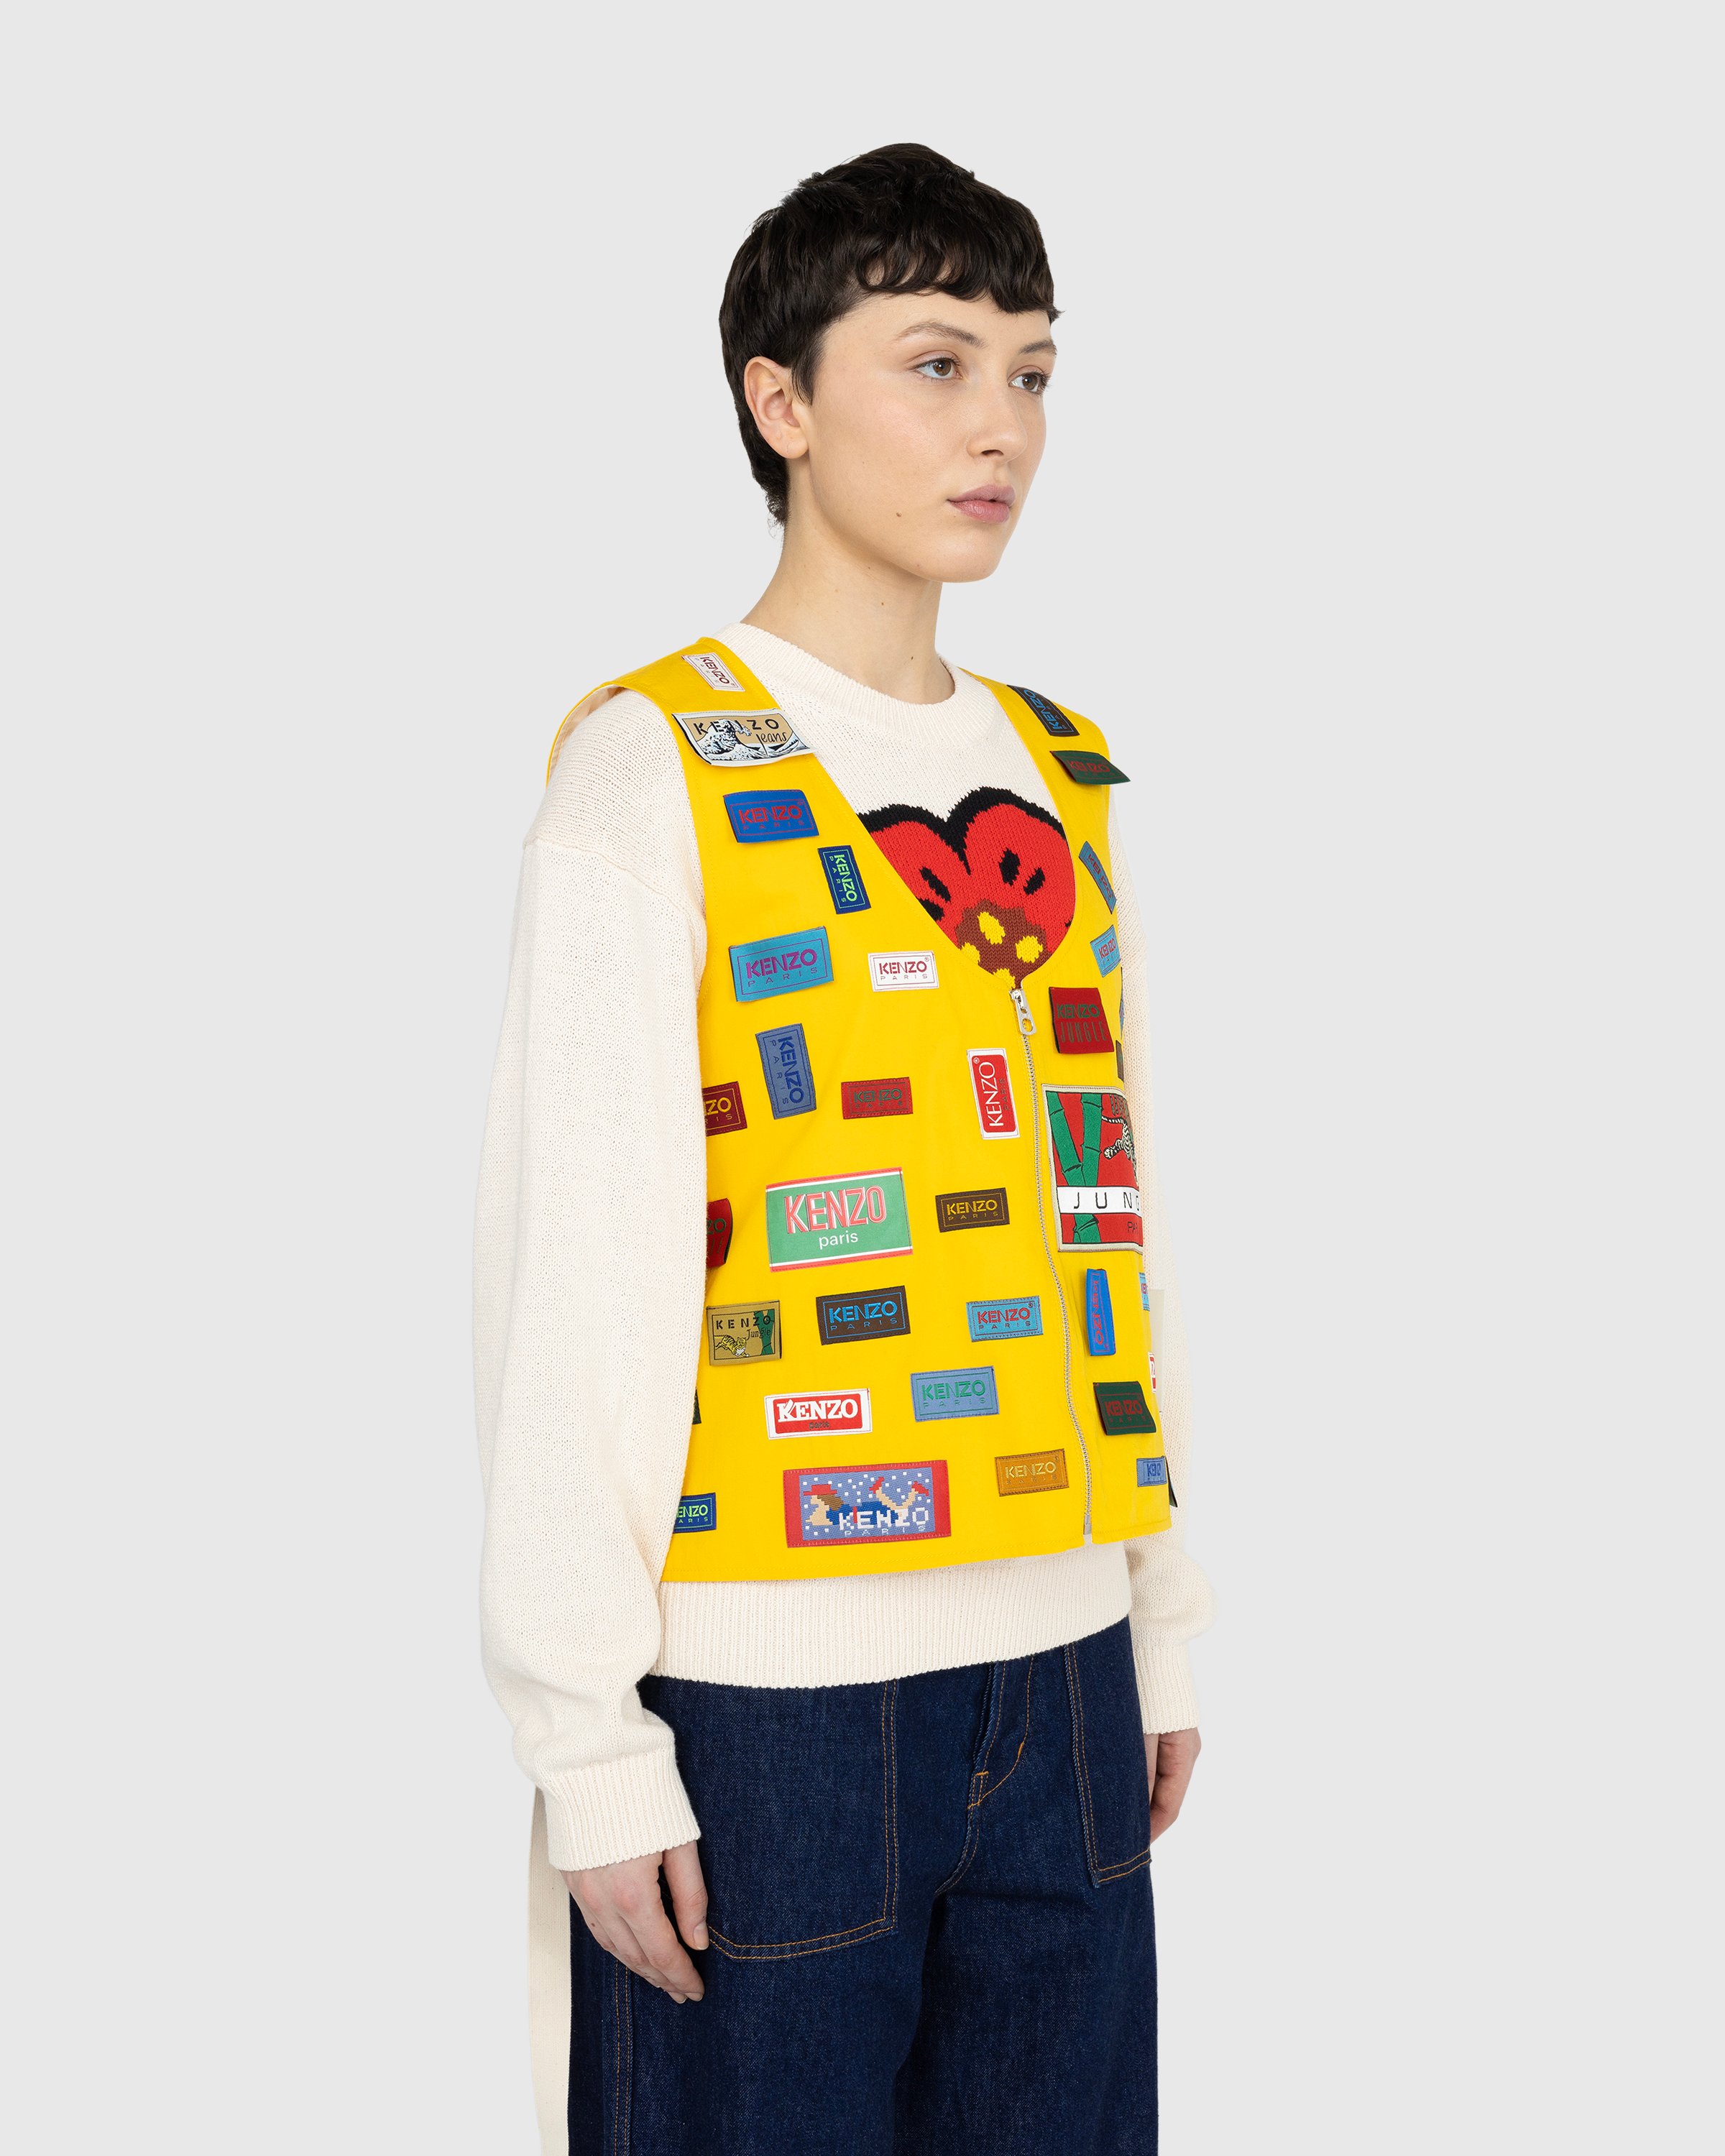 Kenzo - ‘Archives Labels’ Vest - Clothing - Yellow - Image 2